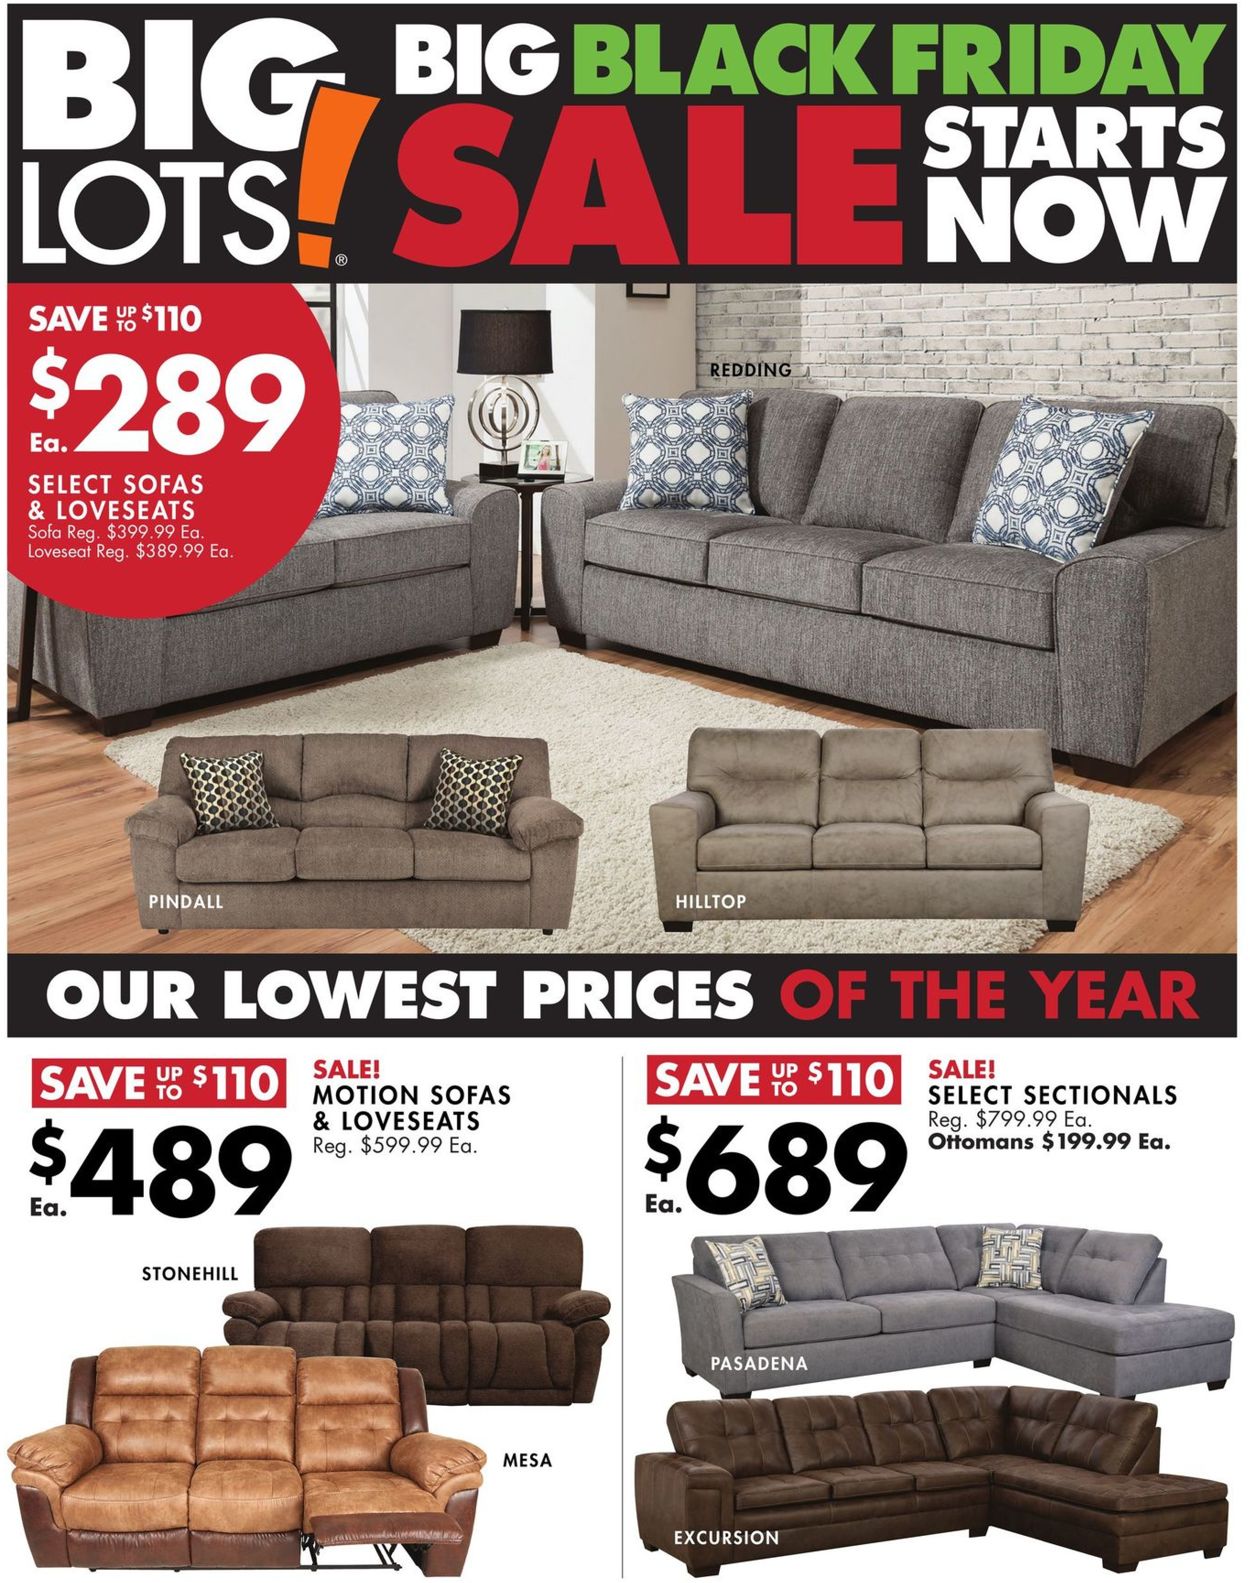 Big Lots Black Friday Ad 2019 Current Weekly Ad 11 23 12 01 2019 Frequent Adscom